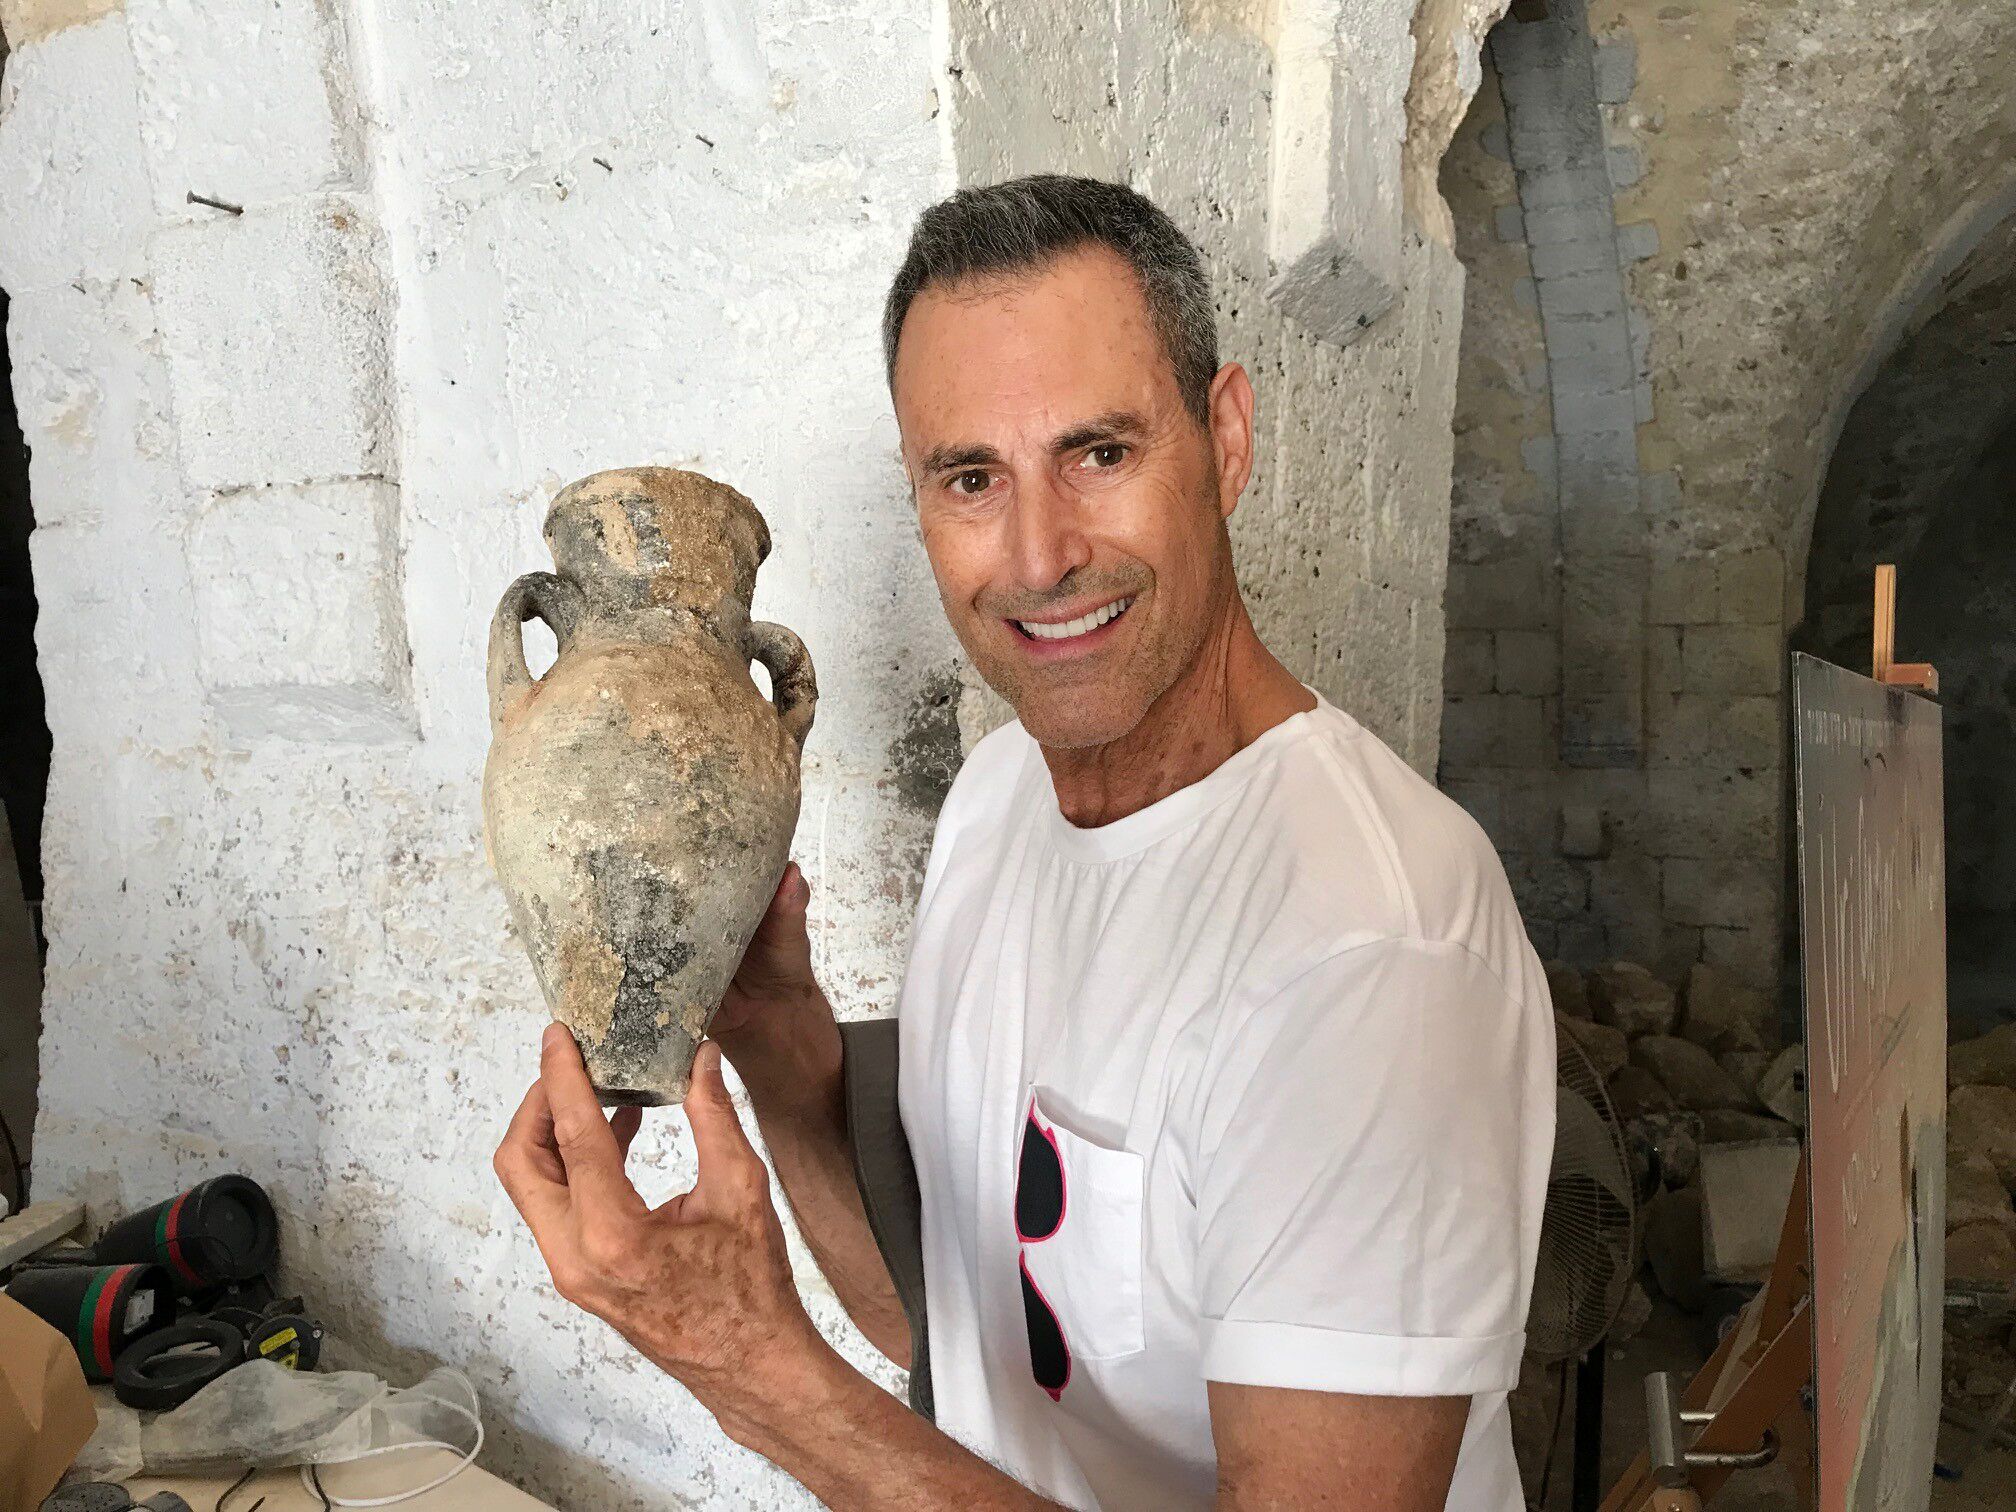 Ottoman-era soap factory discovered in old Jaffa | World Israel News